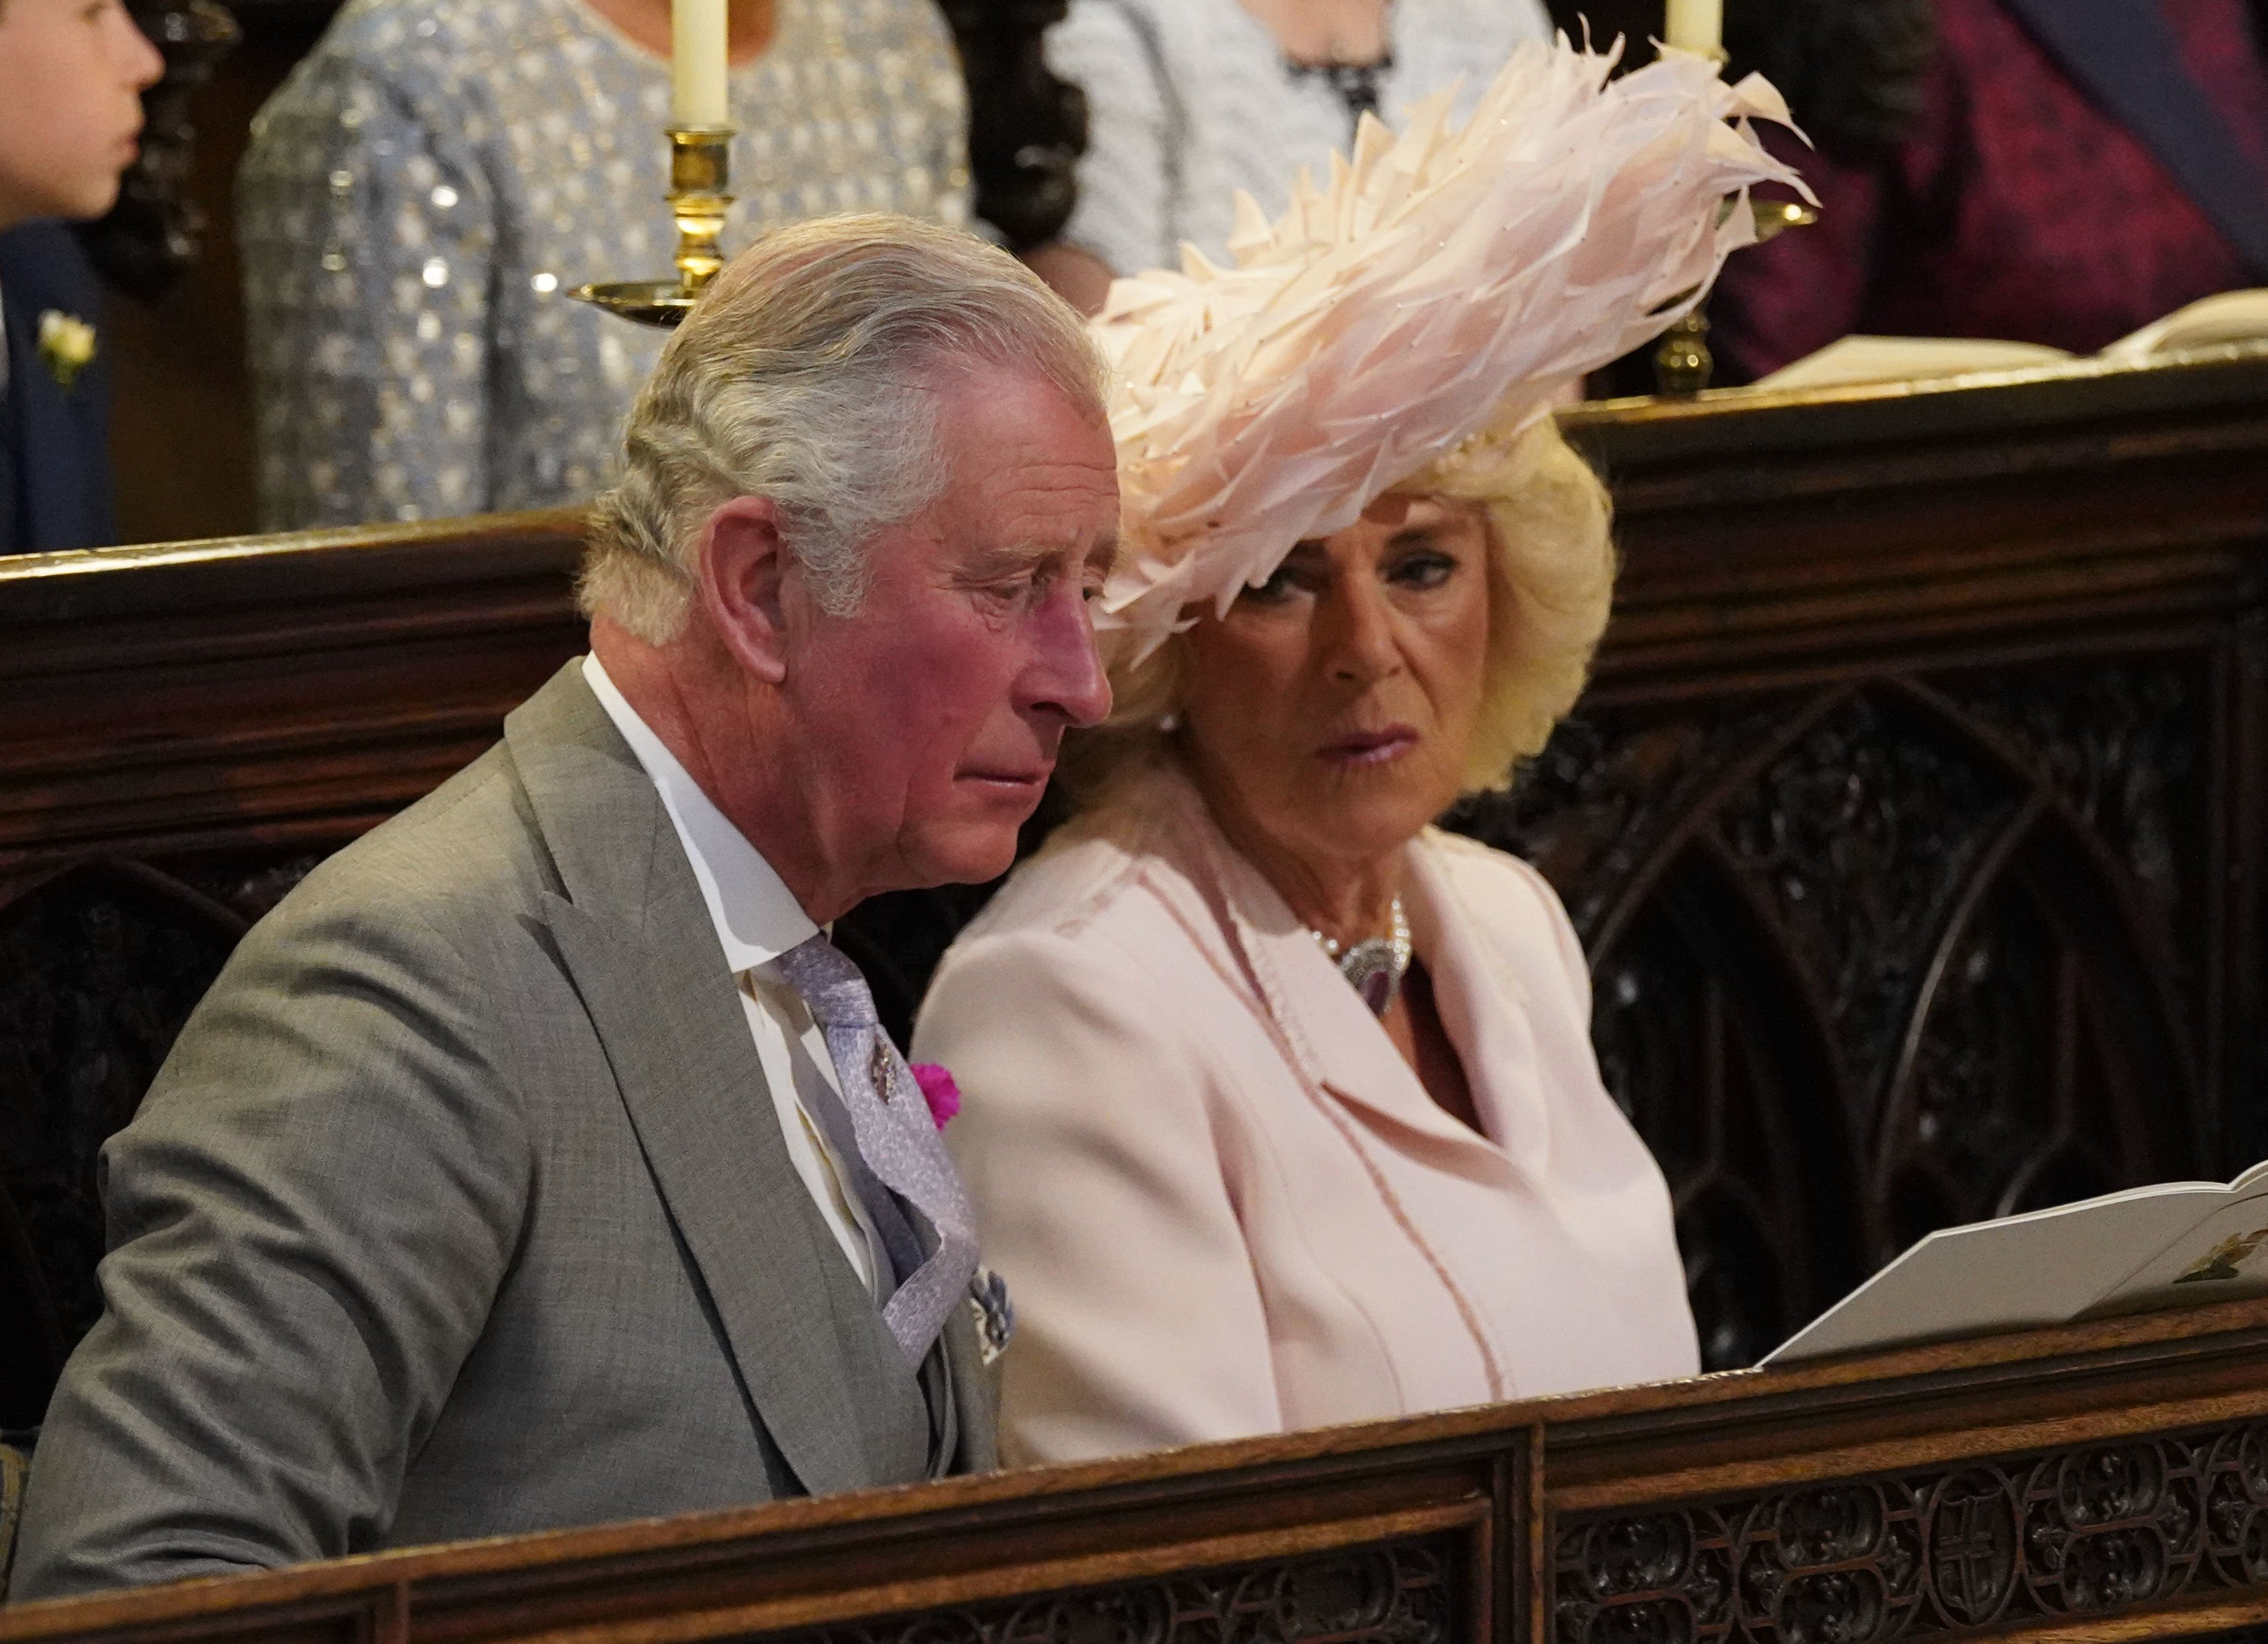 Prince Charles and Camilla, Duchess of Cornwall in the chapel for the wedding ceremony of Prince Harry, Duke of Sussex and US actress Meghan Markle in St George's Chapel, Windsor Castle, on May 19, 2018. | Source: Getty Images